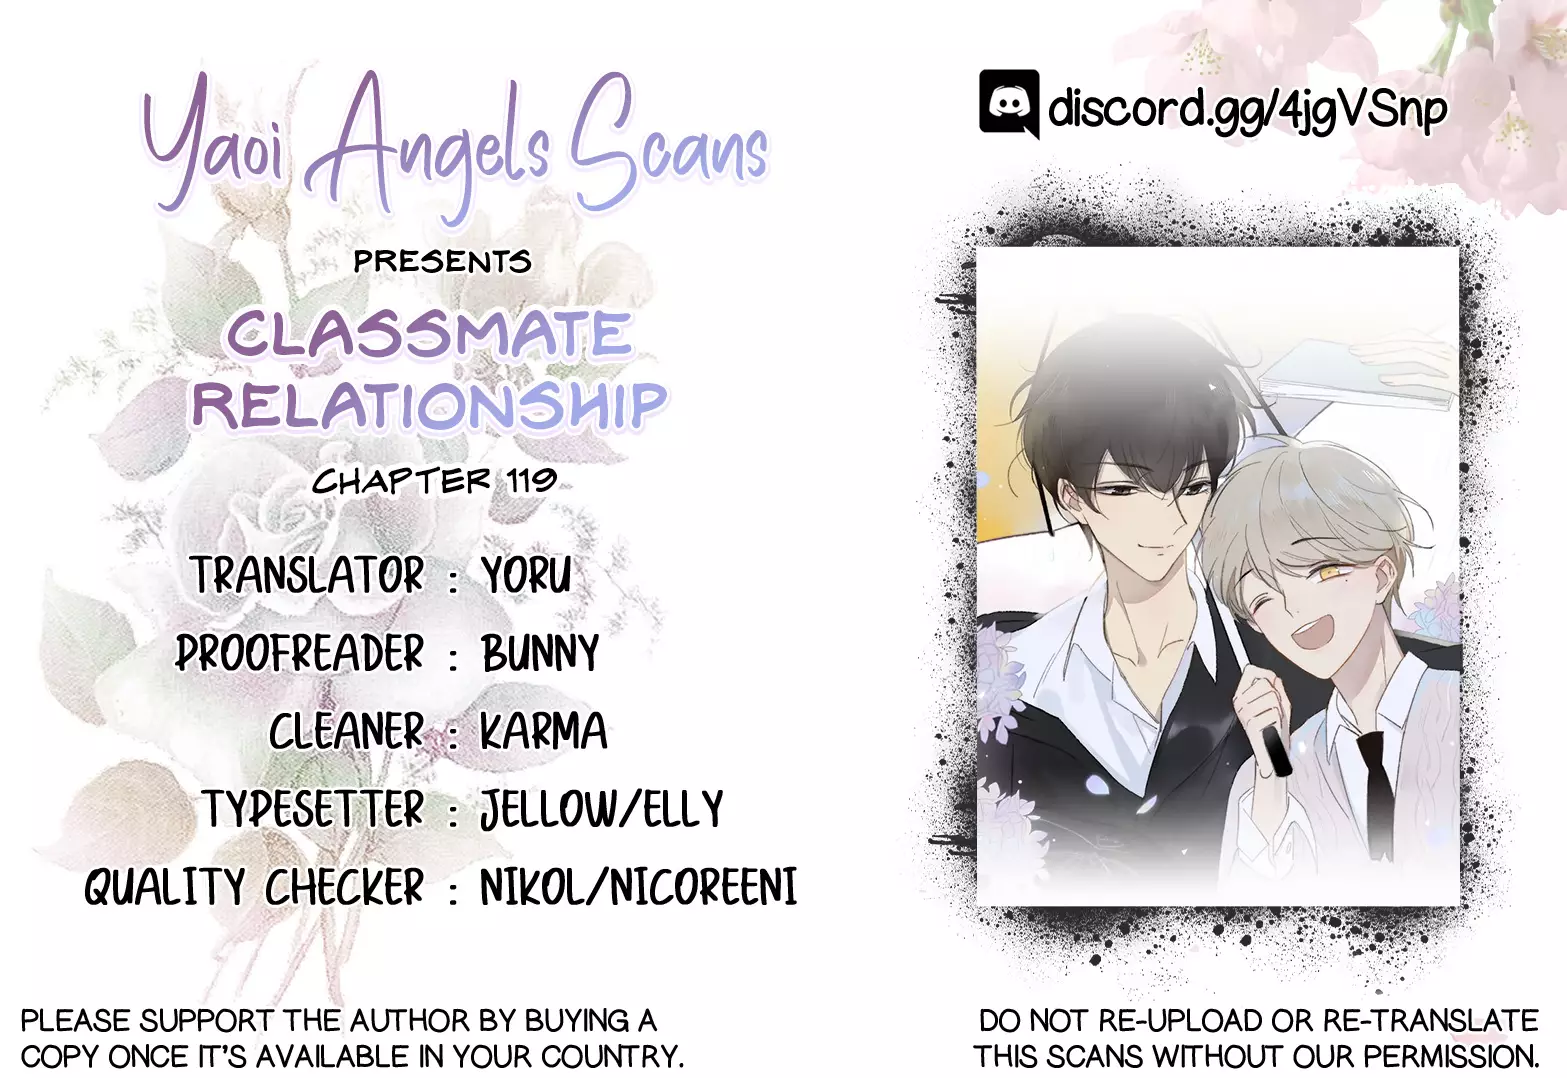 Classmate Relationship? - 119 page 1-859eaca9